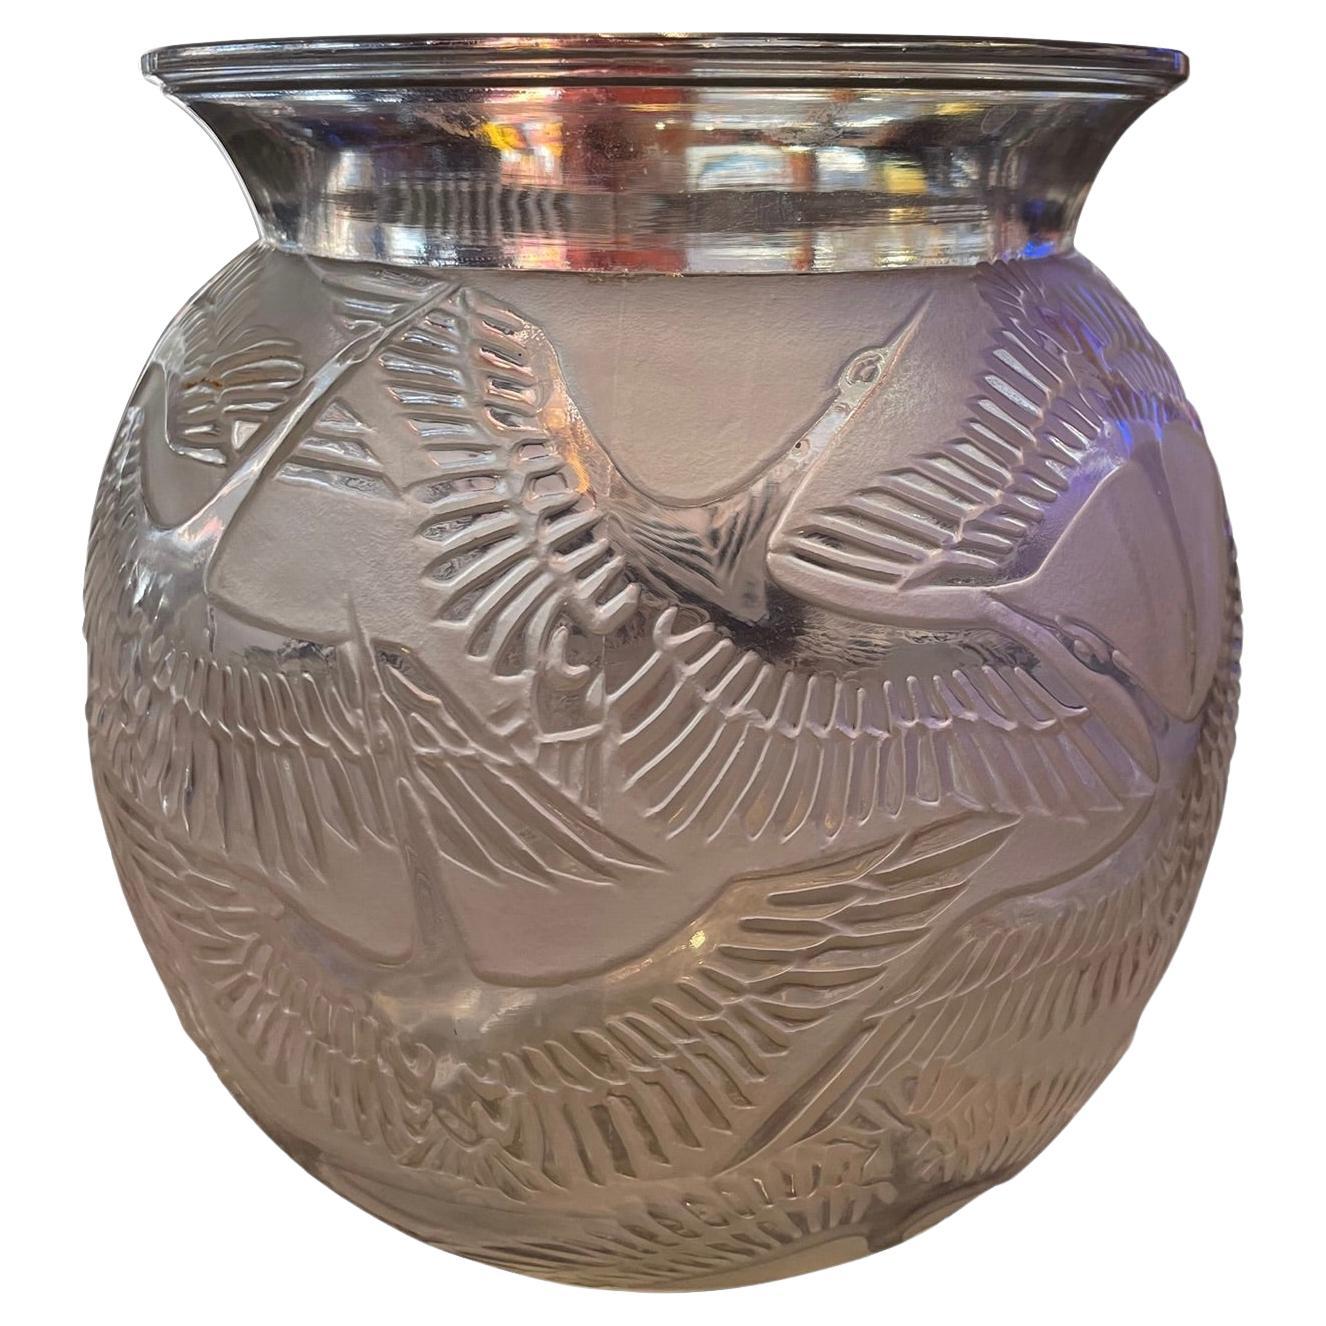 Lalique "Cigogne" Vase From the Linda Ronstadt Collection For Sale